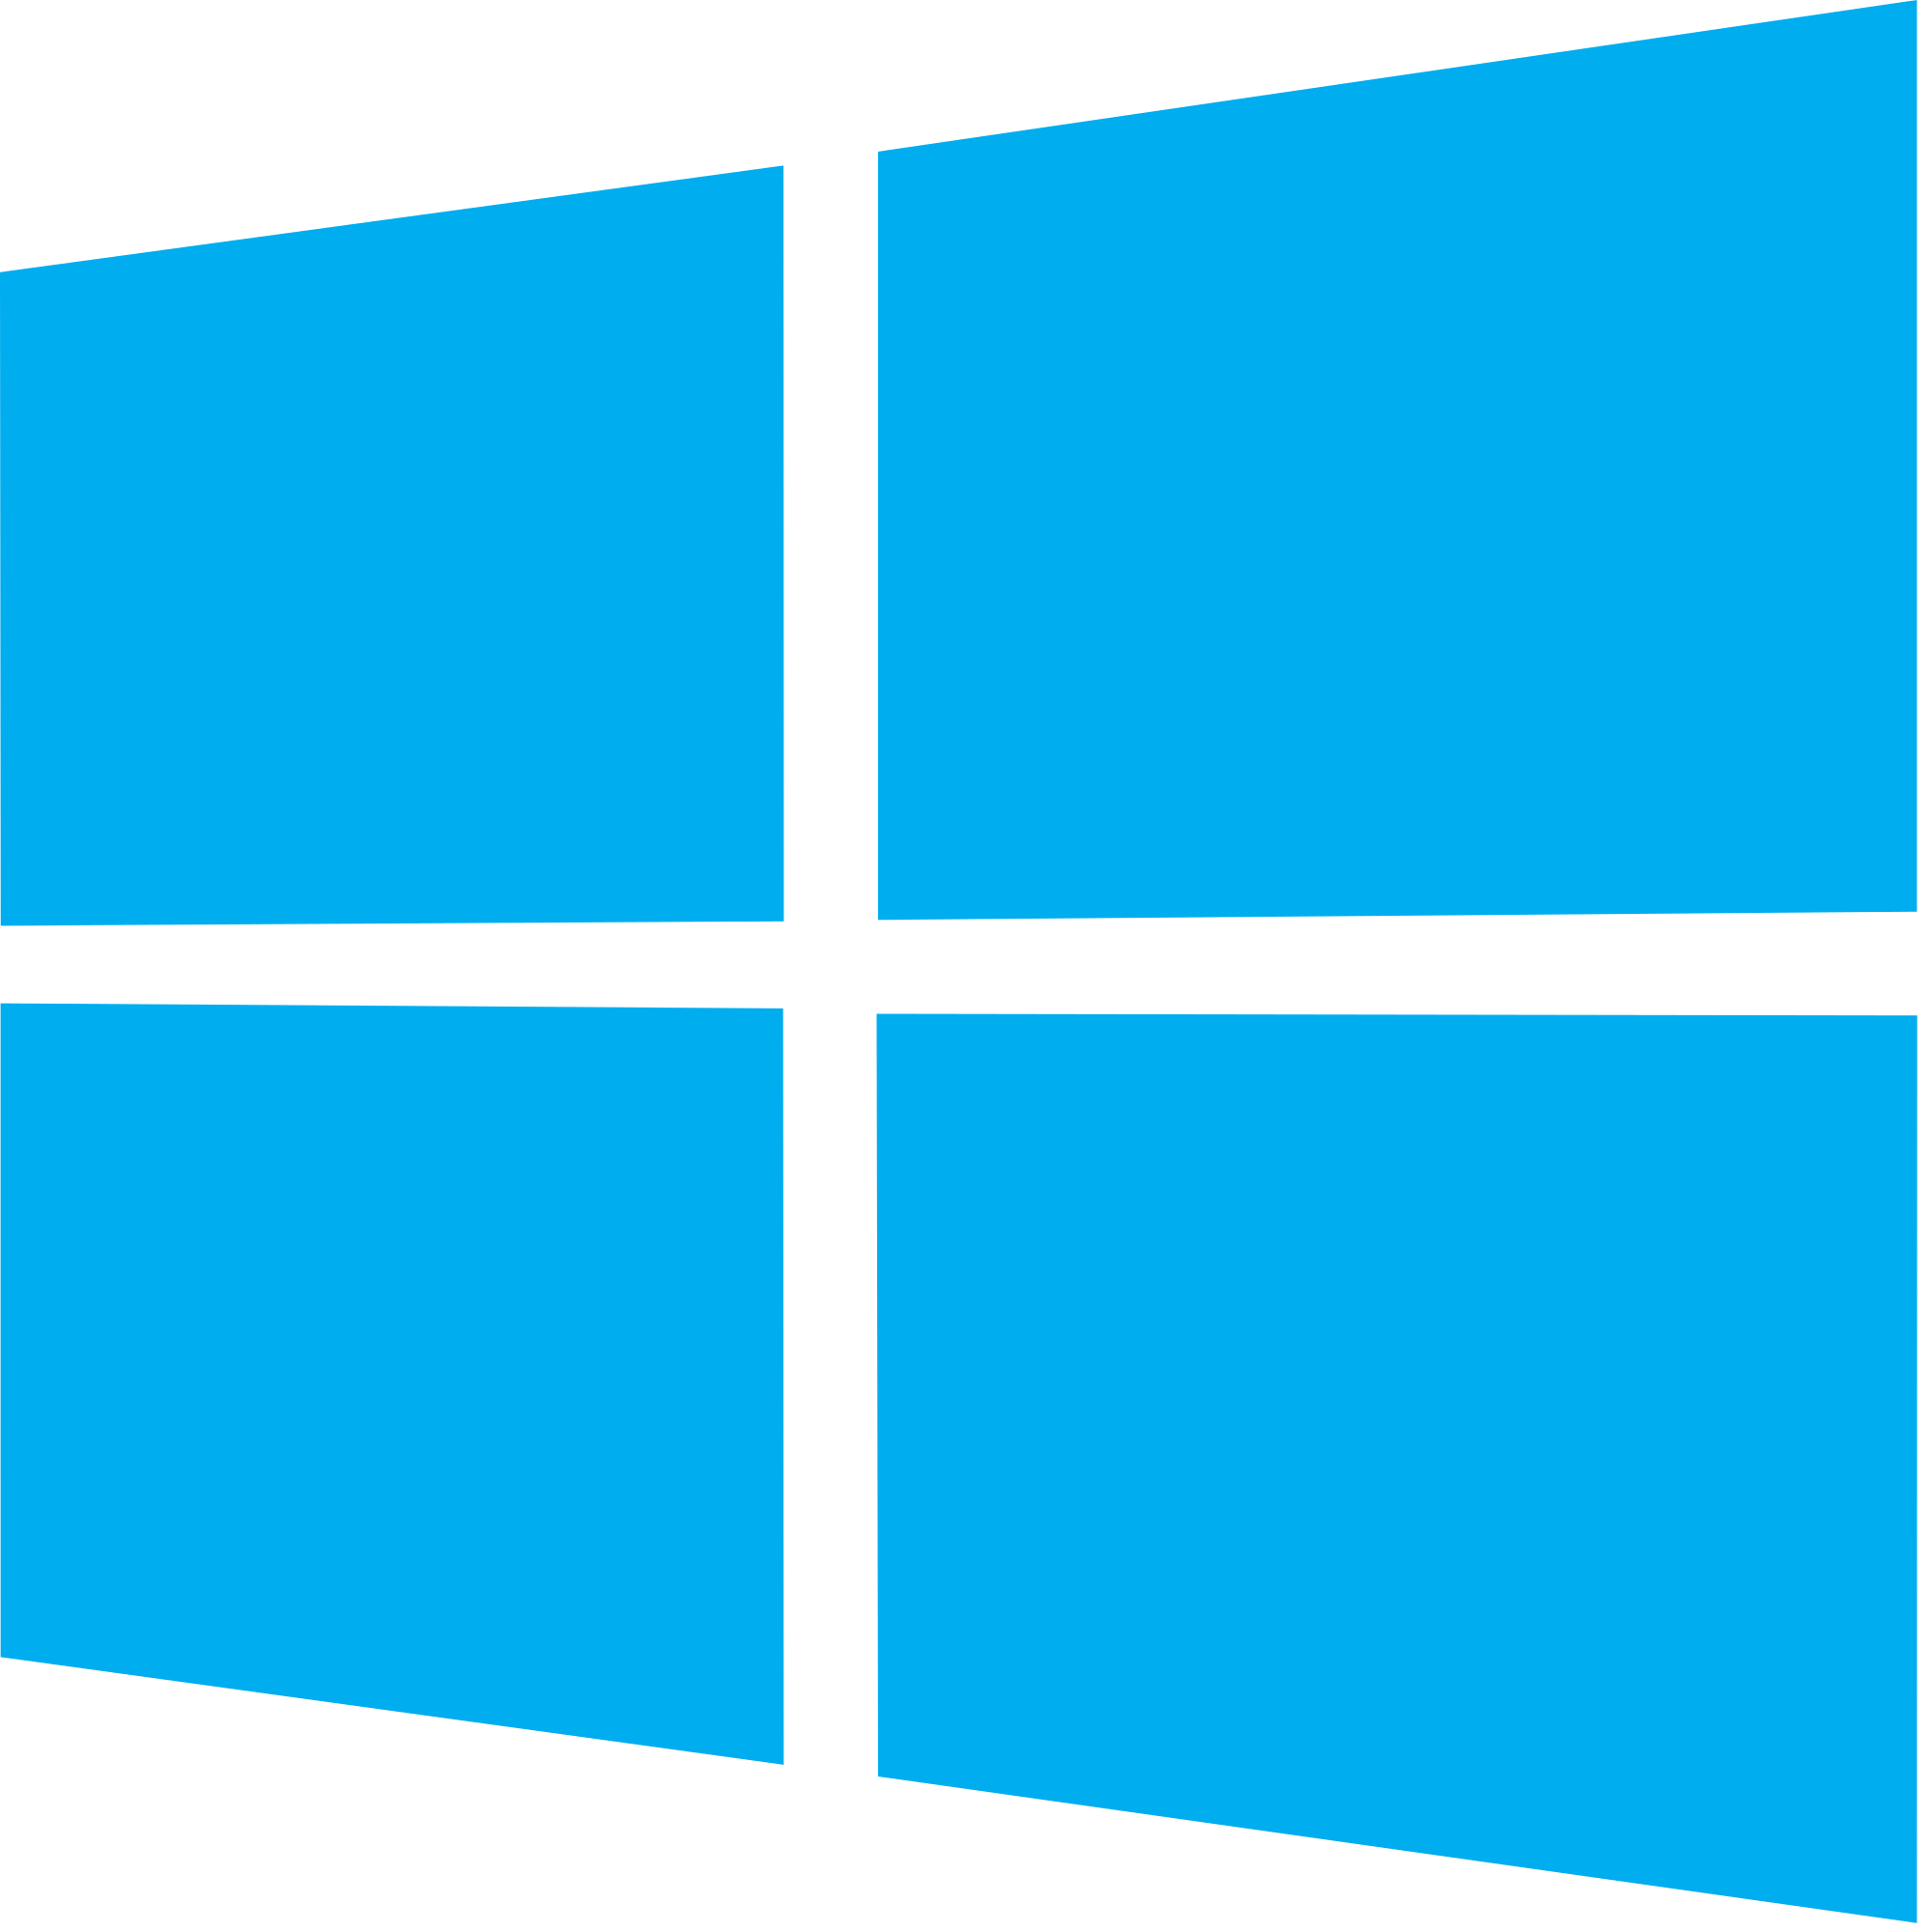 Trust Microsoft if you want the best Windows 10 experience